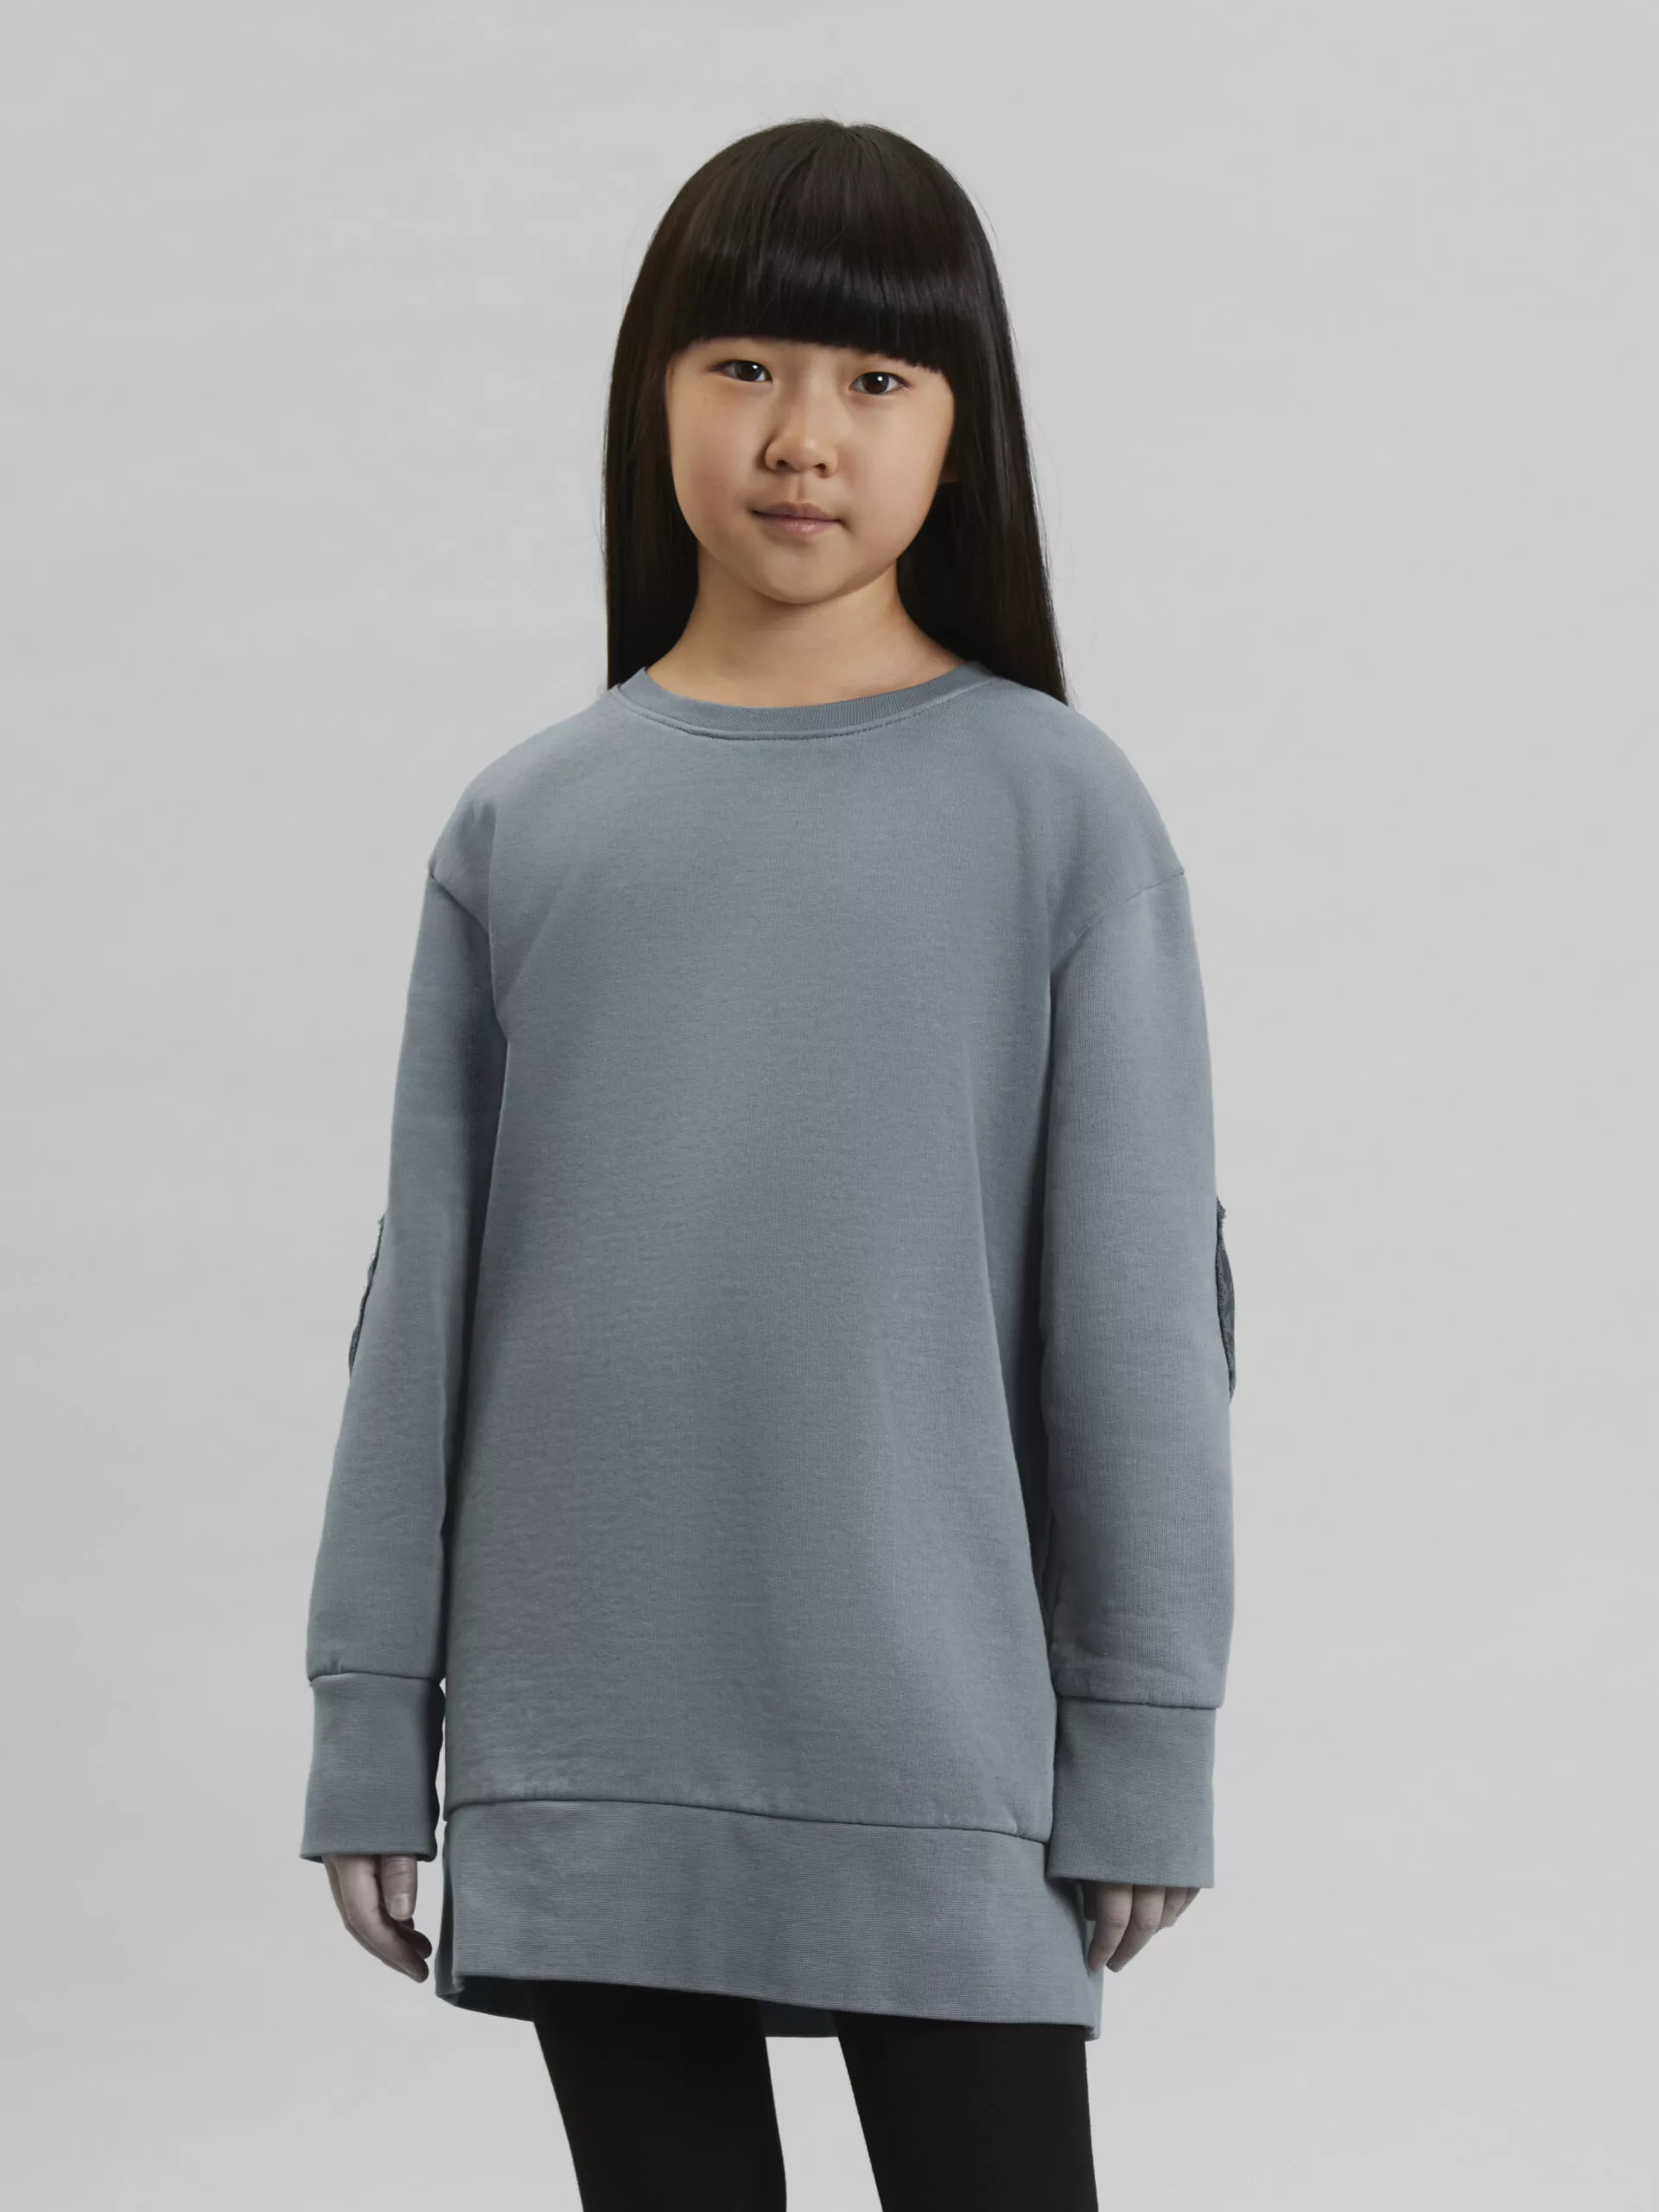 Anna Jersey Dress in Grey for Kids - Eli and Amalia